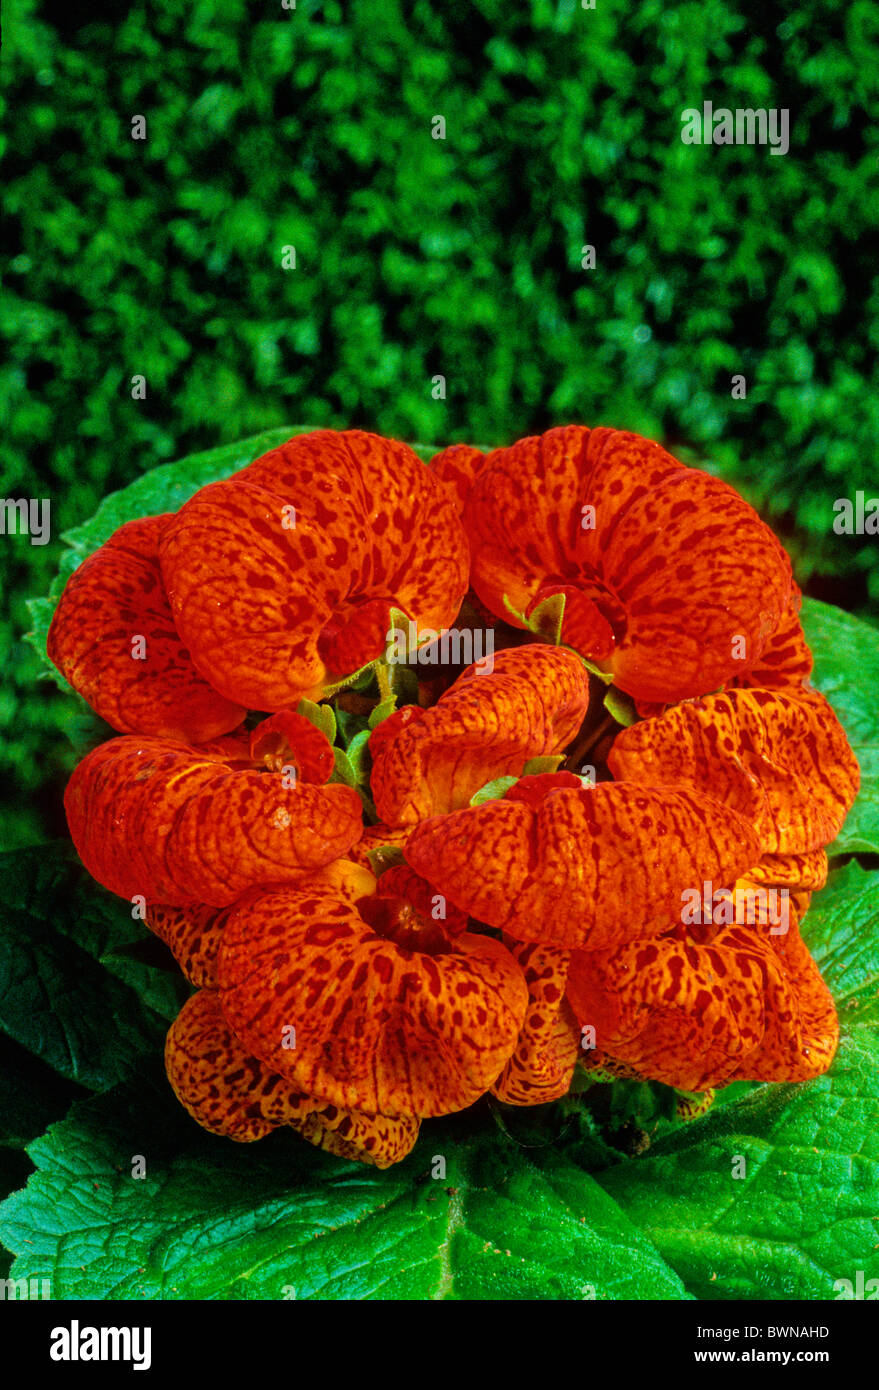 Growing and Caring for Pocketbook Plant (Calceolaria) | Florgeous